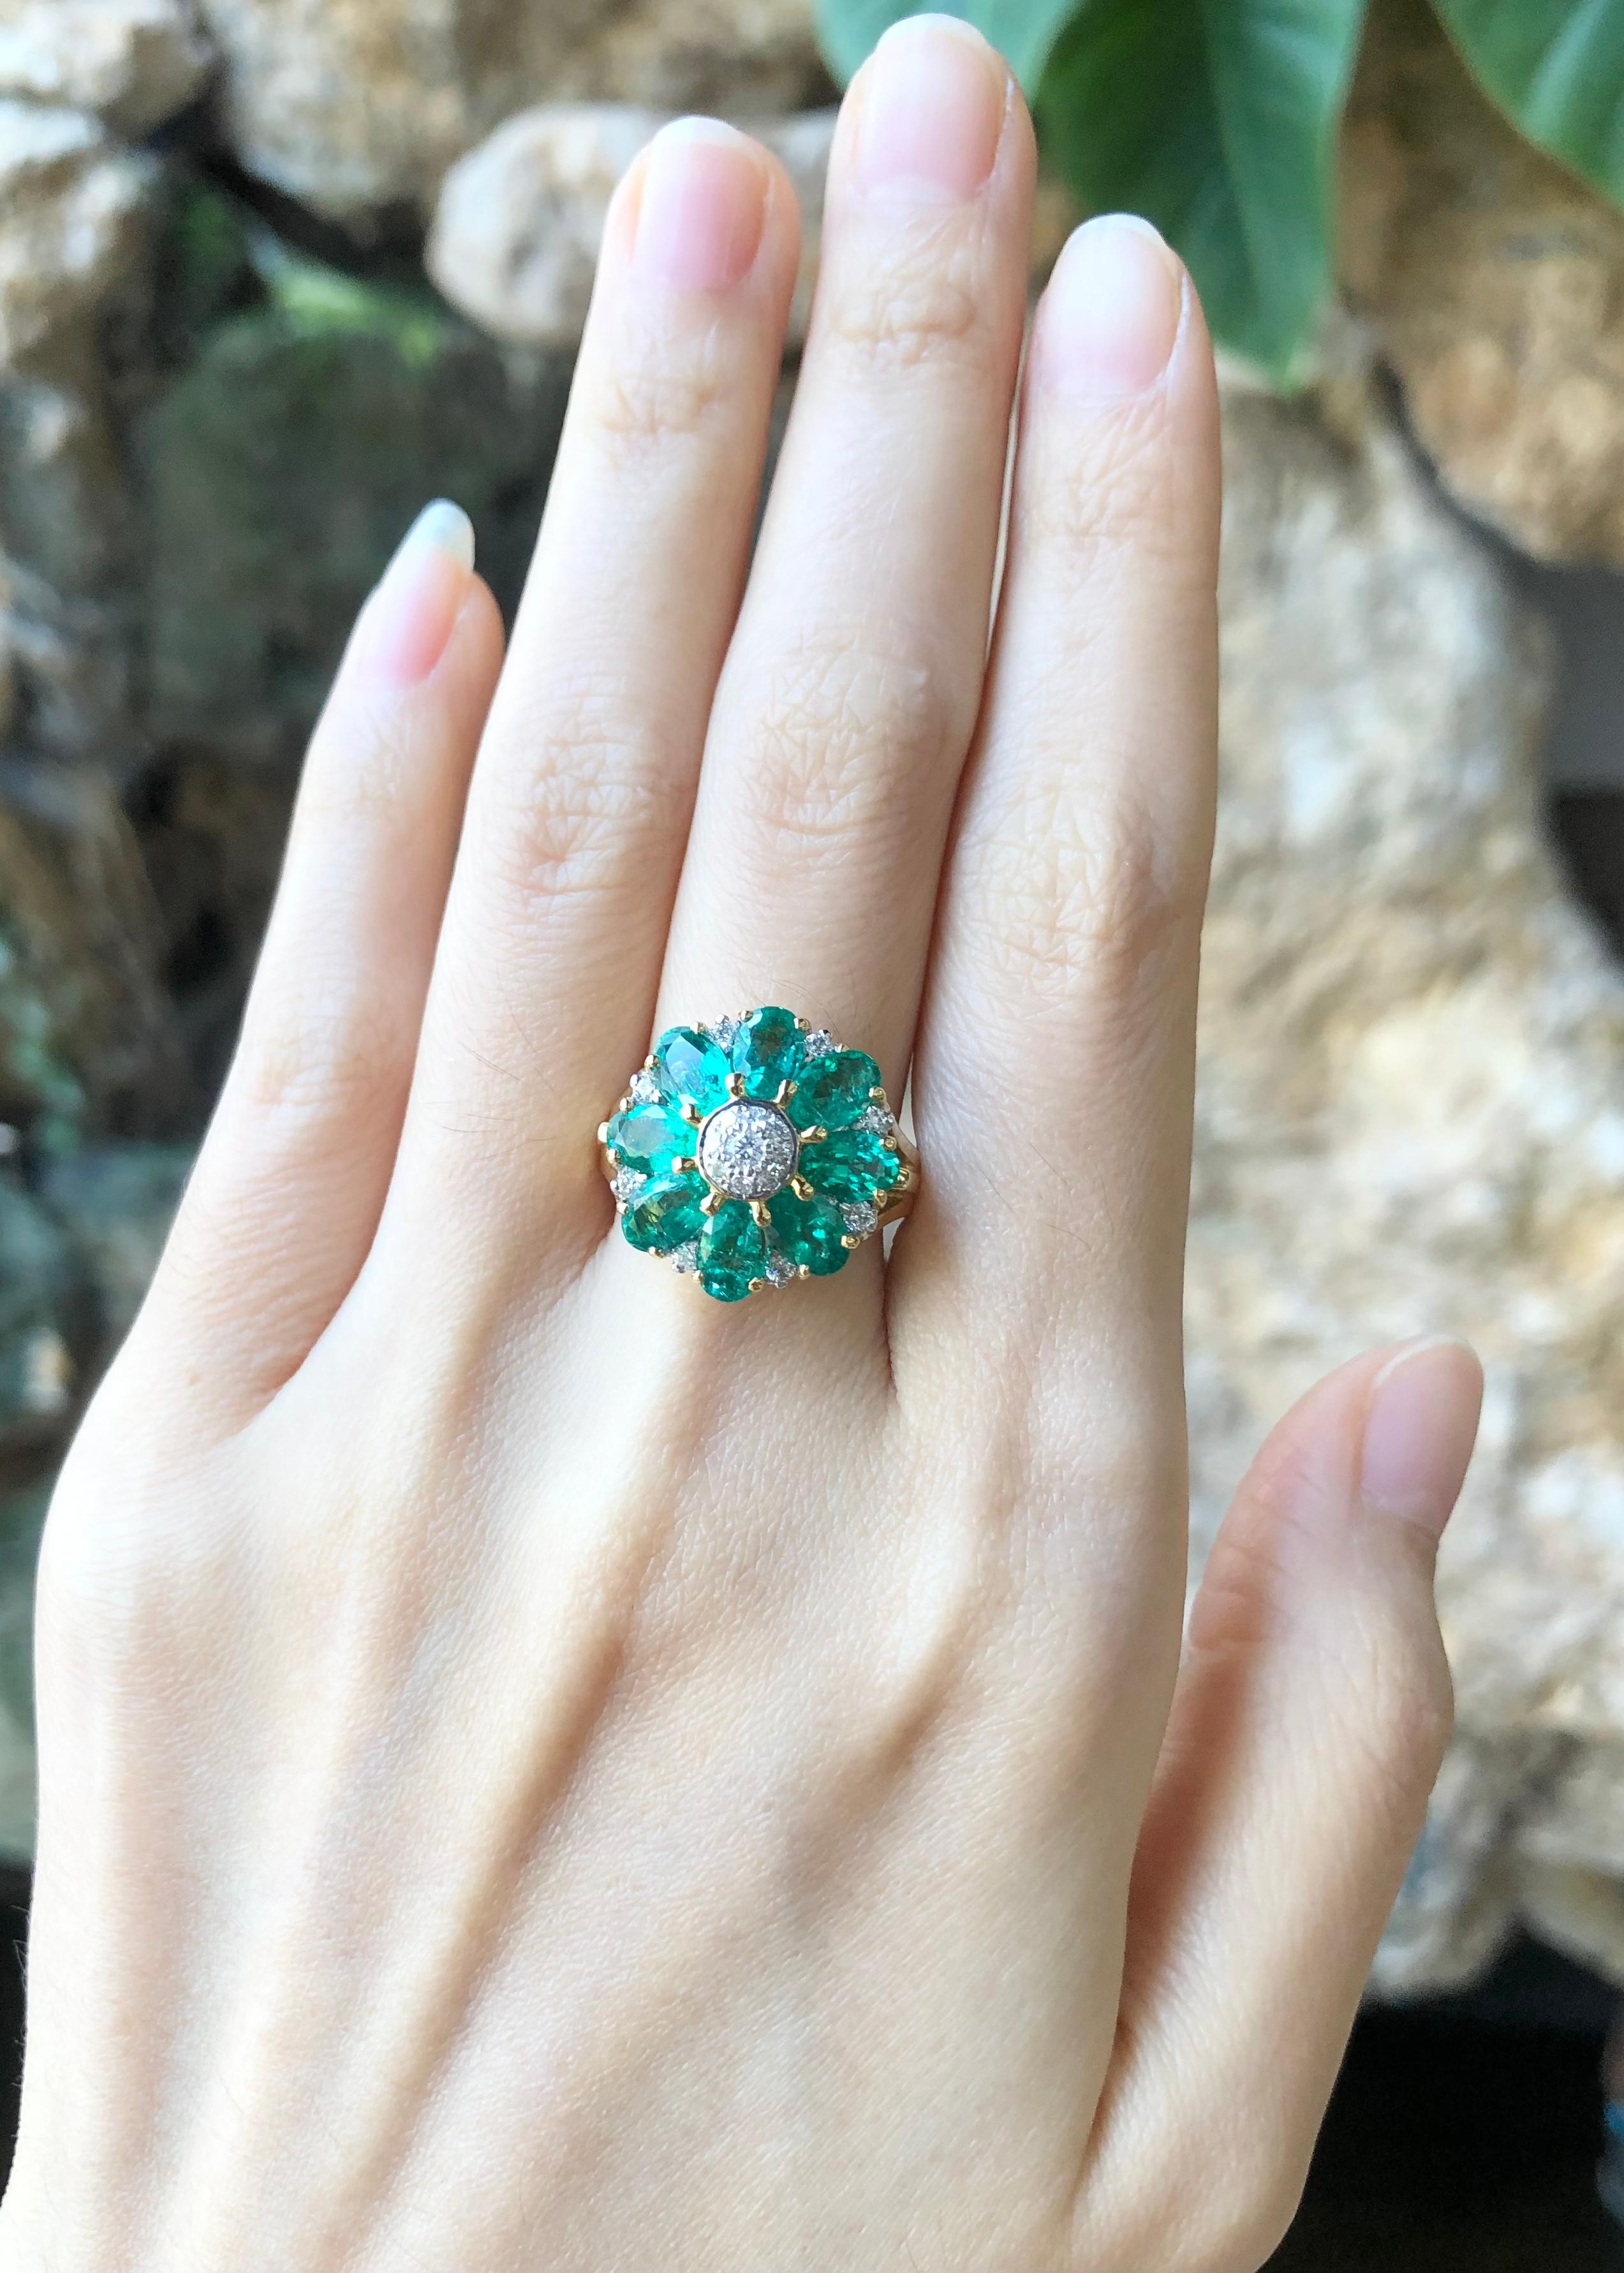 Emerald 3.56 carats with Diamond 0.30 carat Ring set in 18 Karat Gold Settings

Width:  1.8 cm 
Length: 1.8 cm
Ring Size: 54
Total Weight: 9.29 grams


